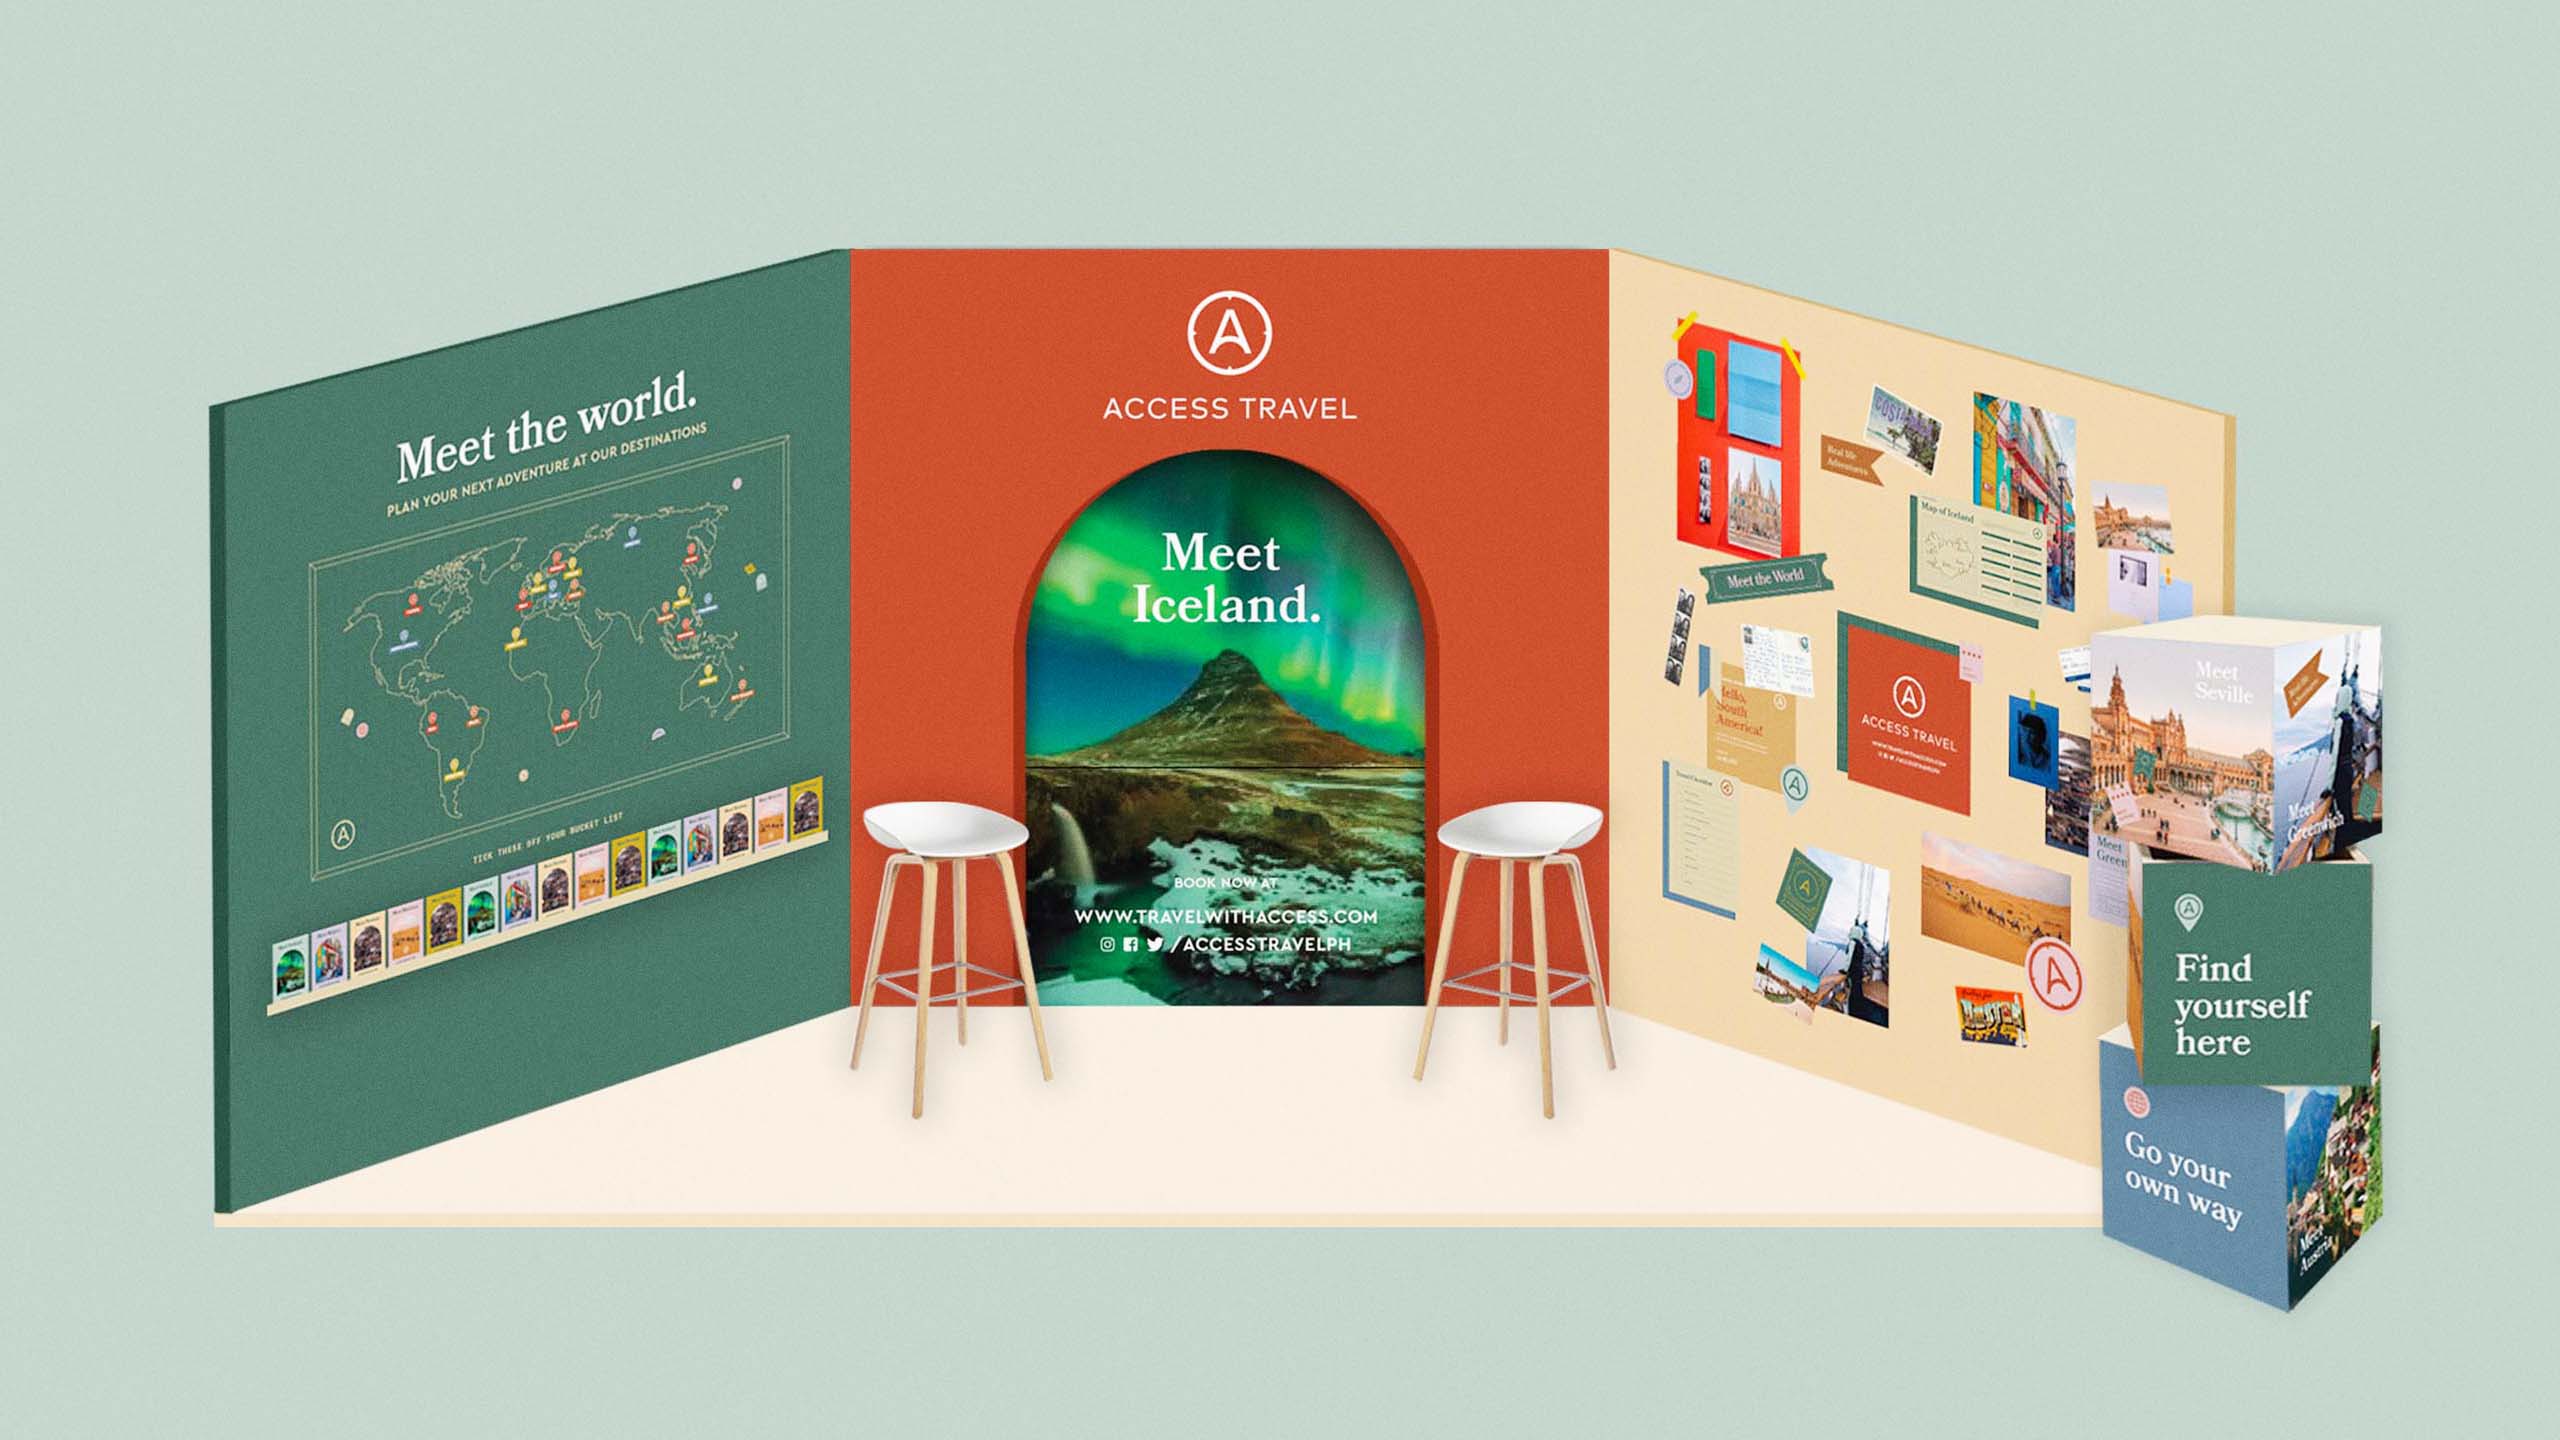 An instagrammable coloful booth design for travel brand Access Travel